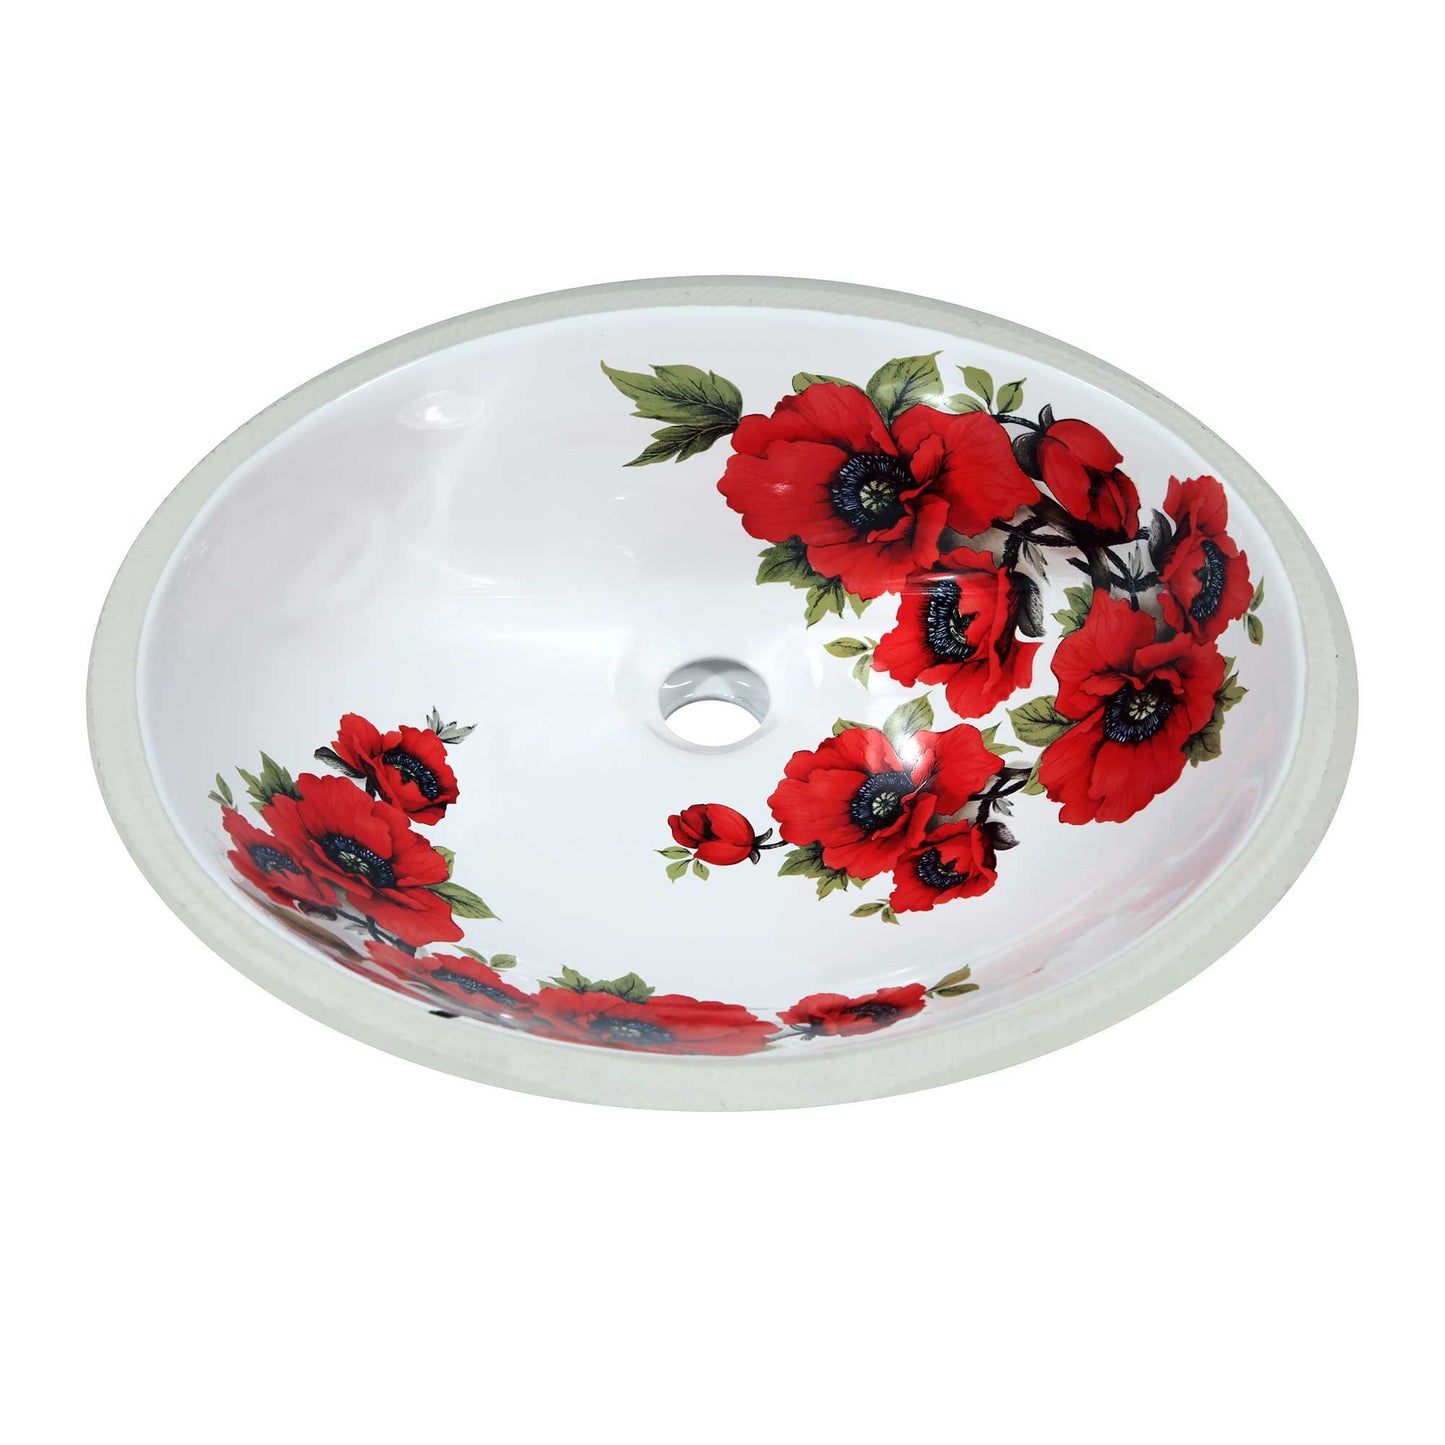 undermount bathroom sink painted with poppies